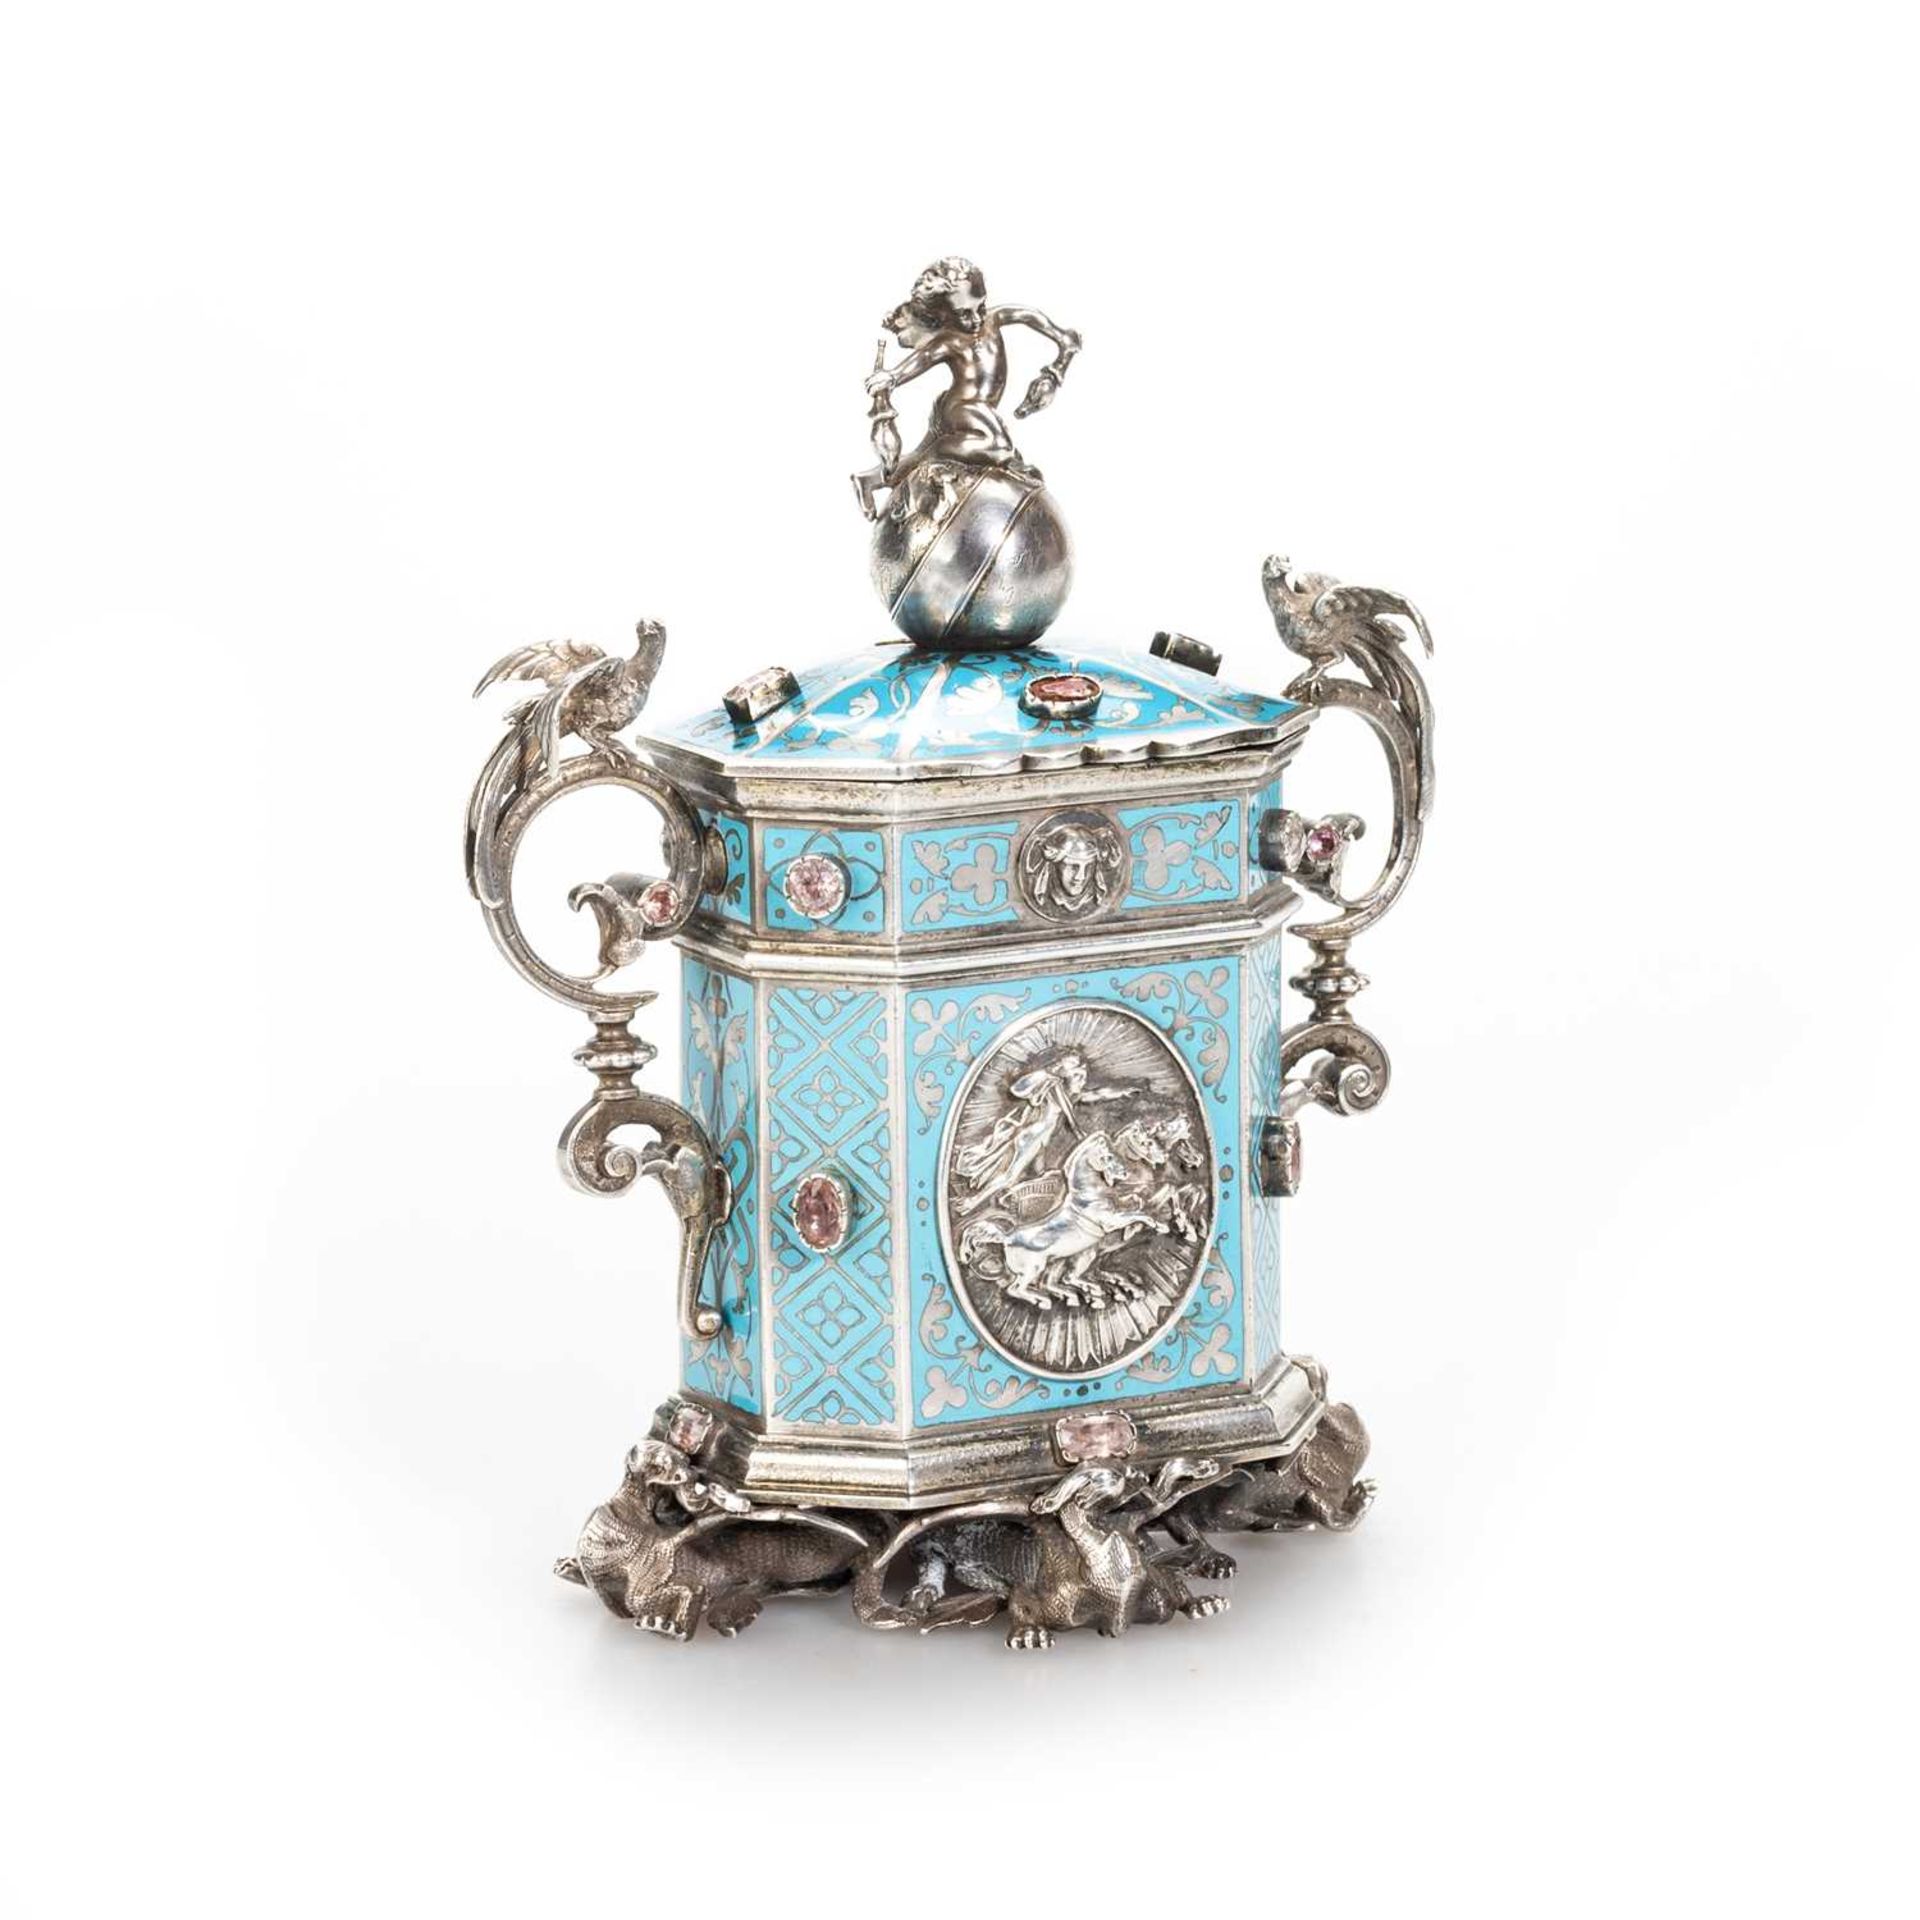 A 19TH CENTURY FRENCH SILVER AND ENAMEL TABLE VESTA, BY FRANÇOIS-DÉSIRÉ FROMENT-MEURICE (1802-1855)